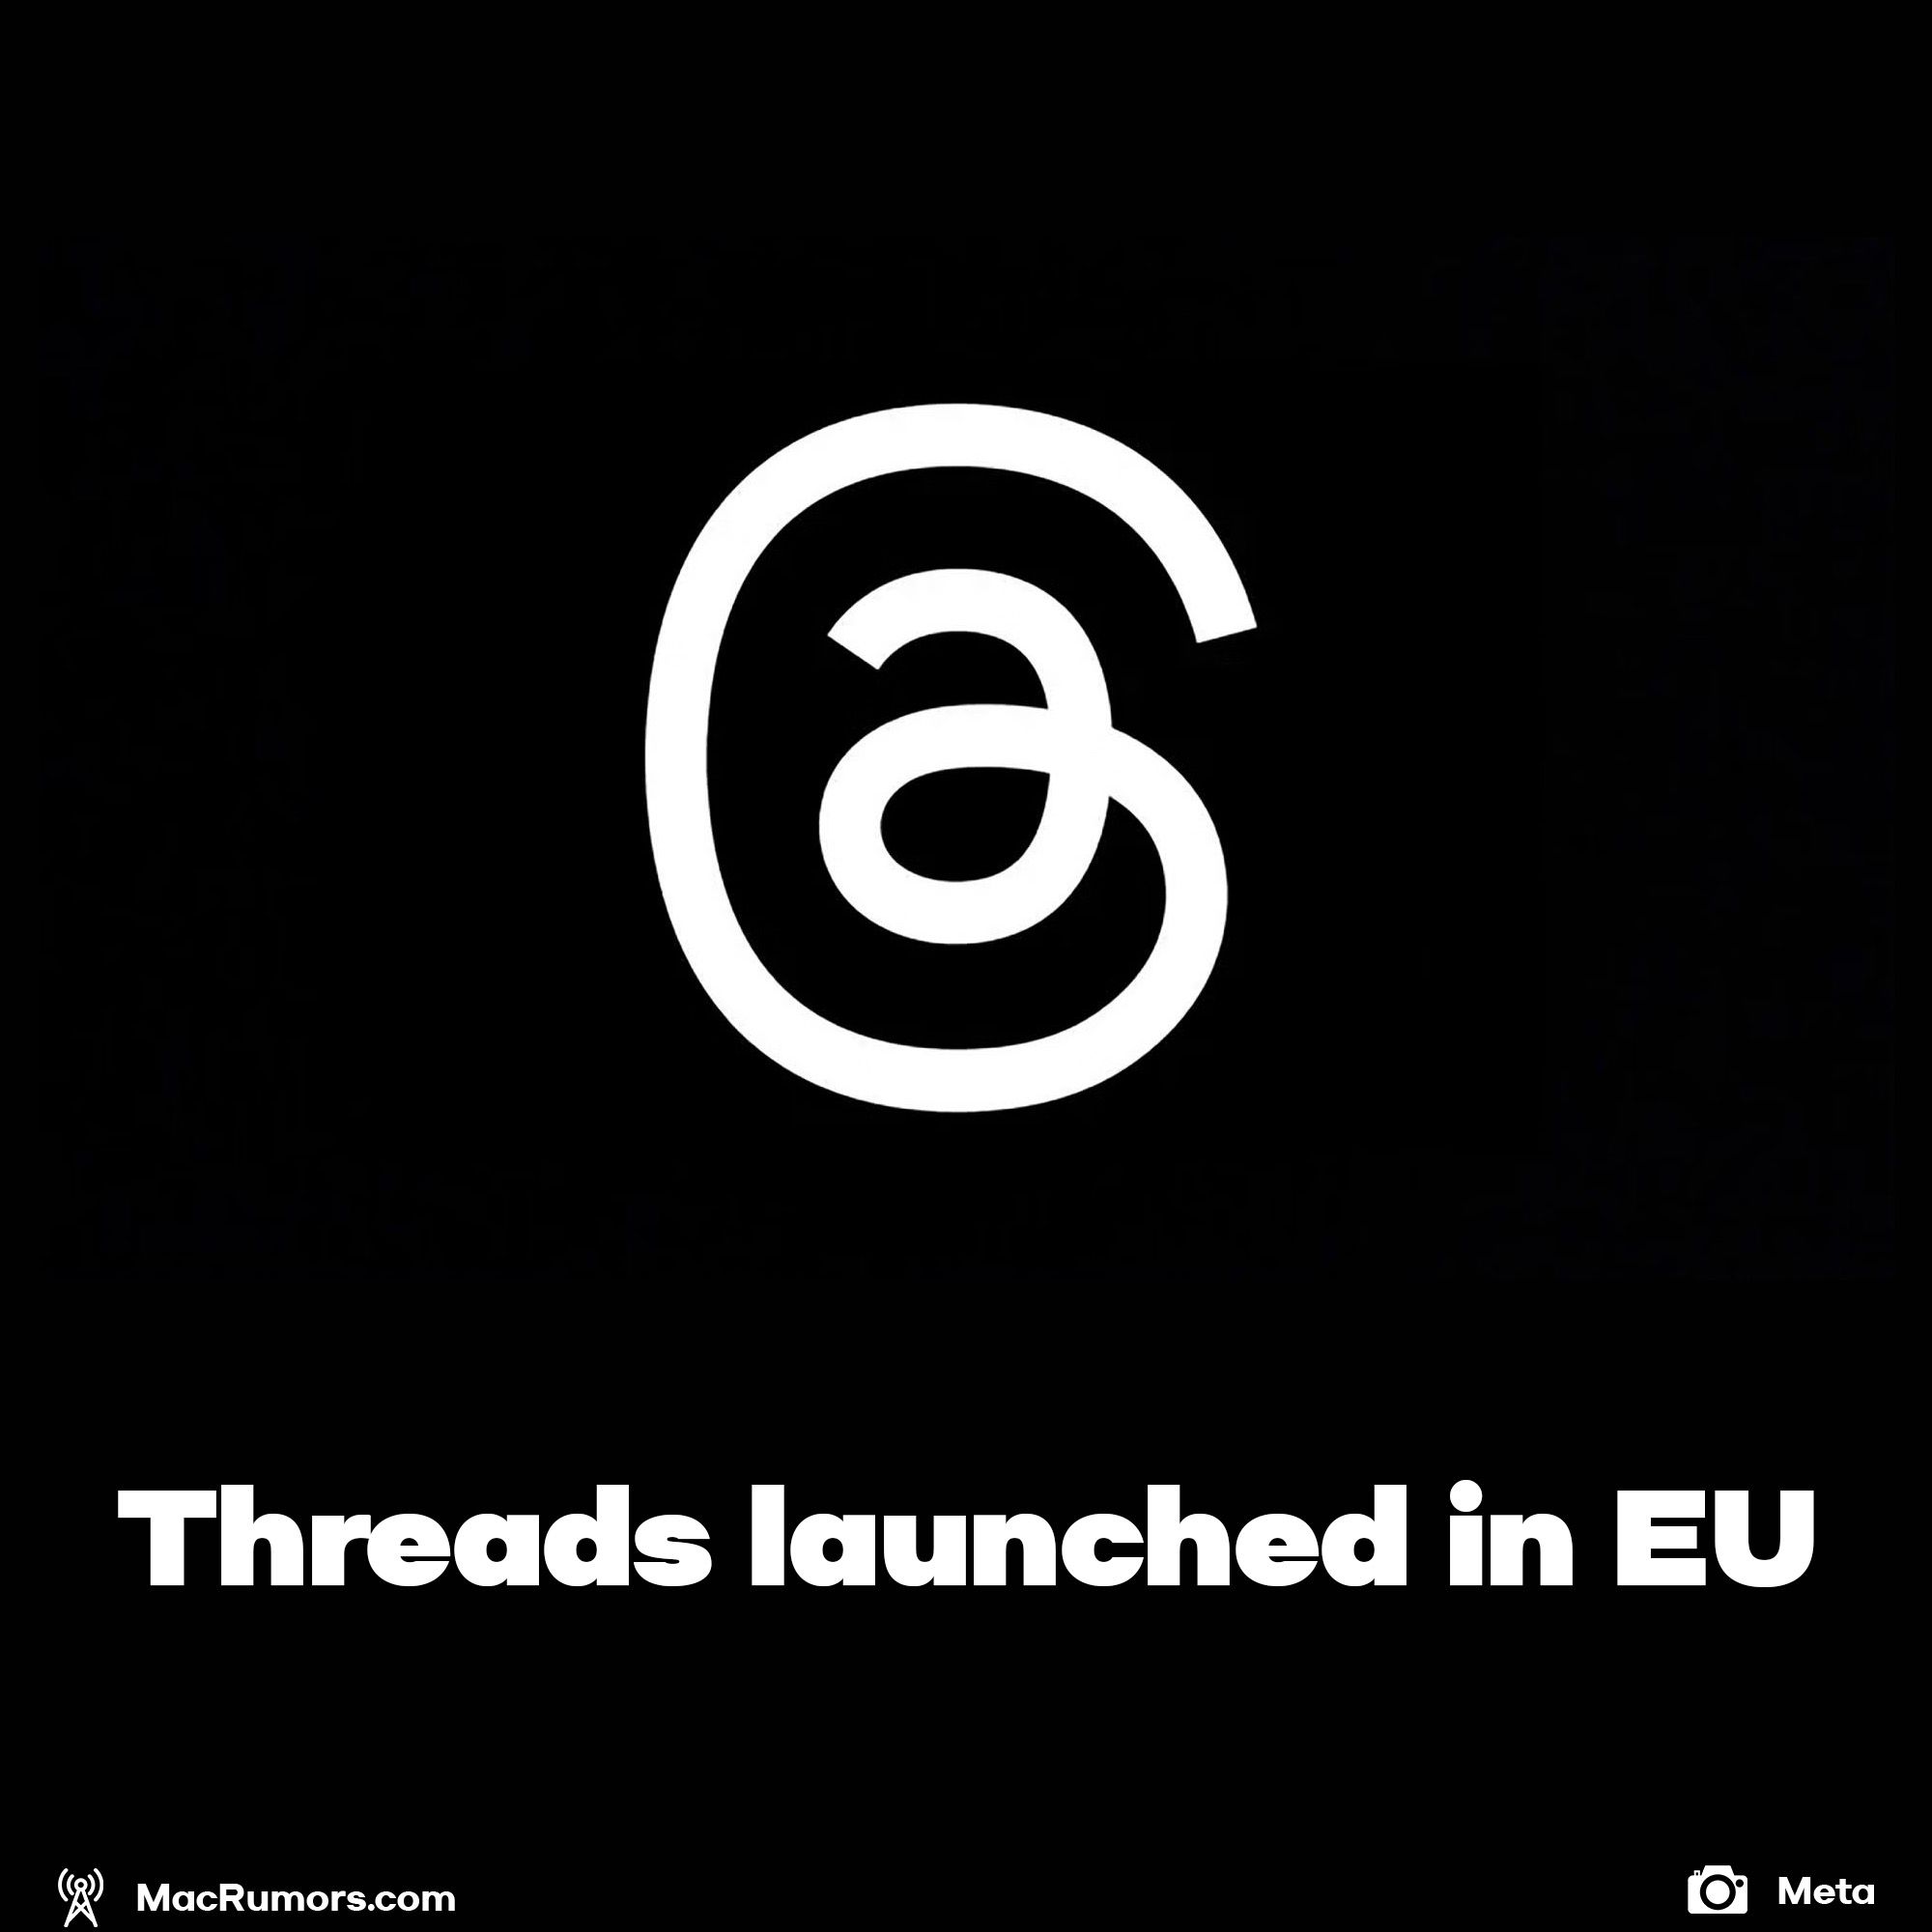 Threads launched in EU